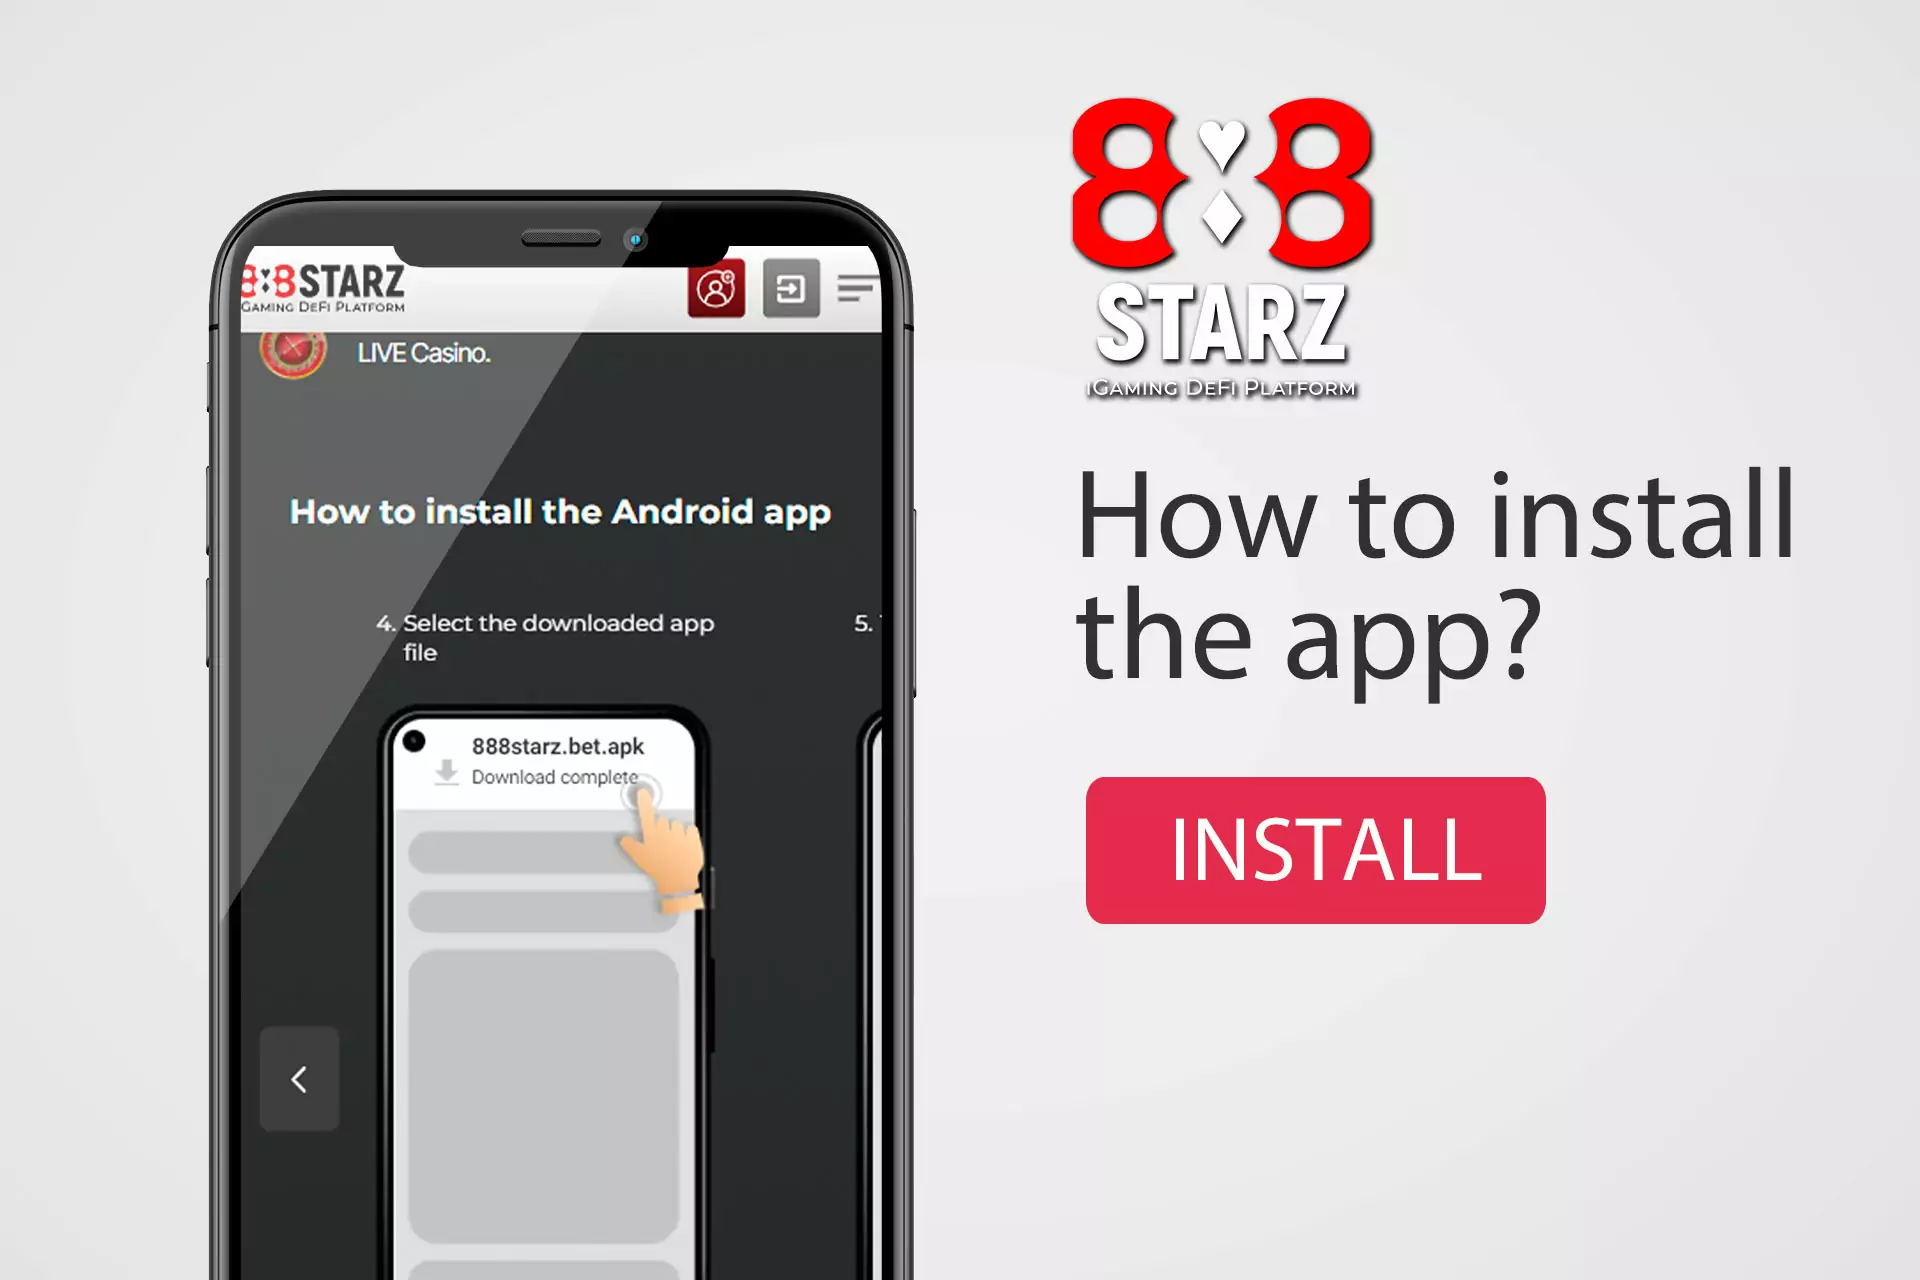 To install the 888starz app you need to download the APK file.